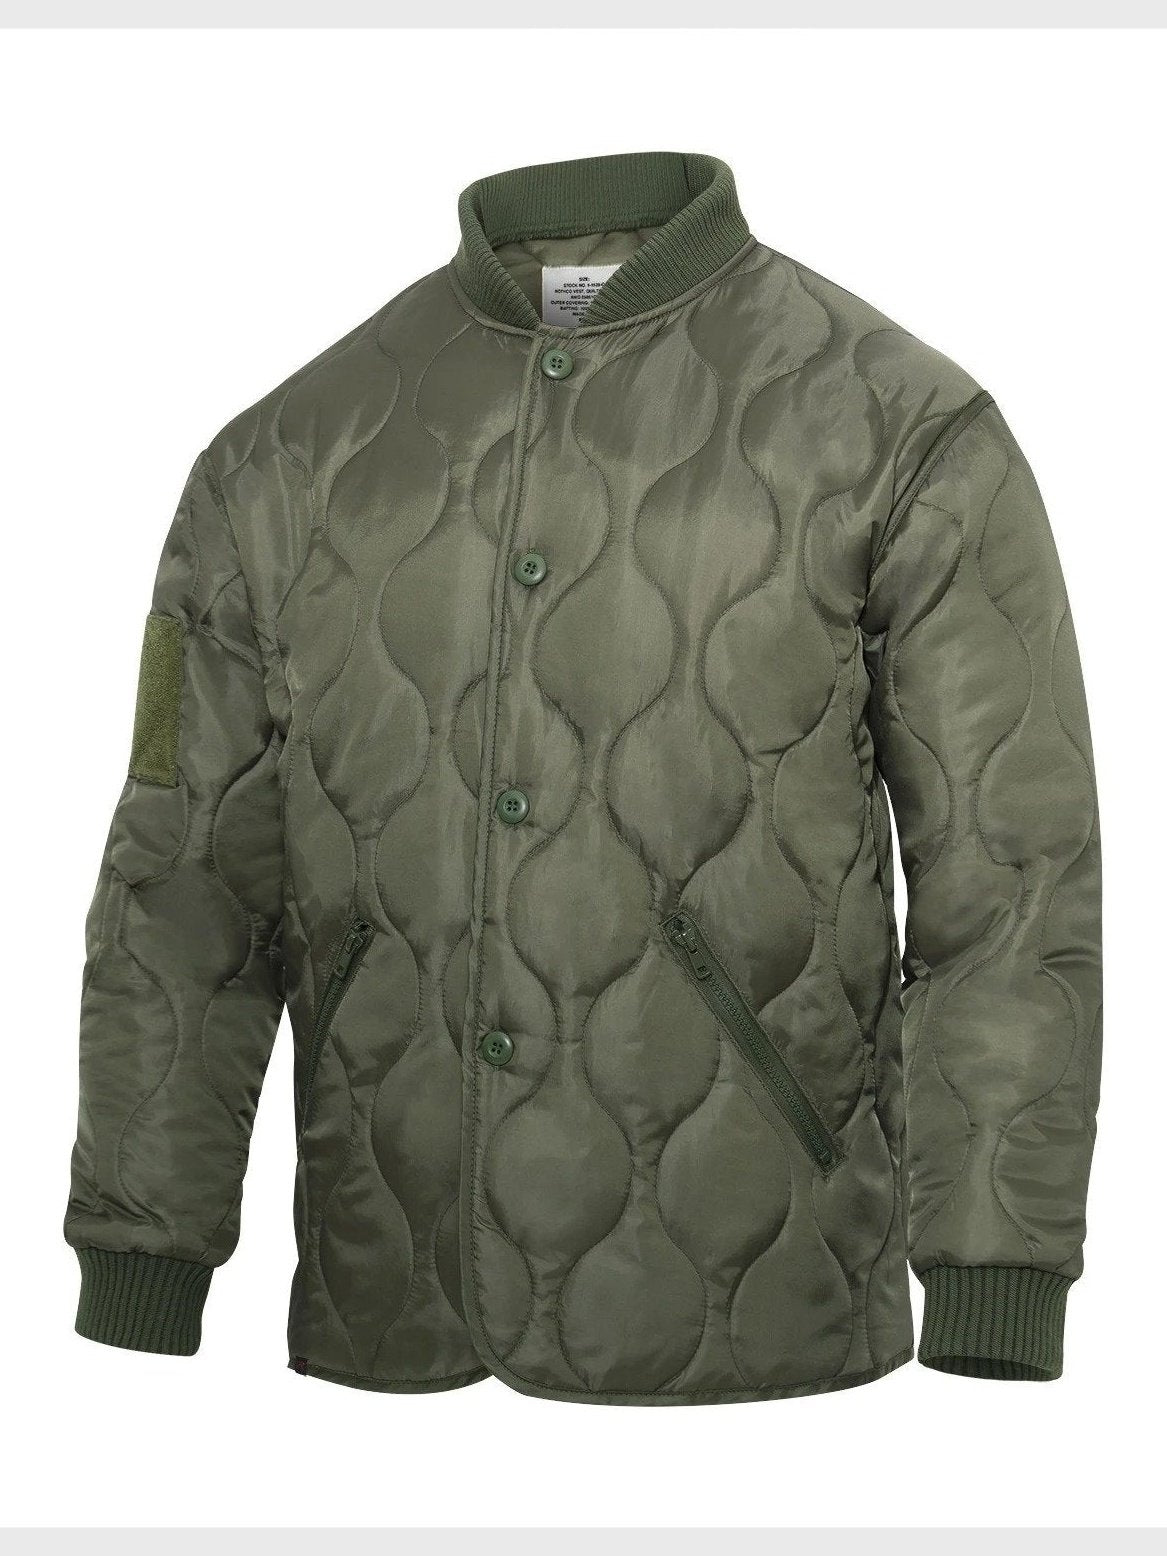 Rothco Men's Quilted Woobie Jacket Olive Drab 10421 10422.